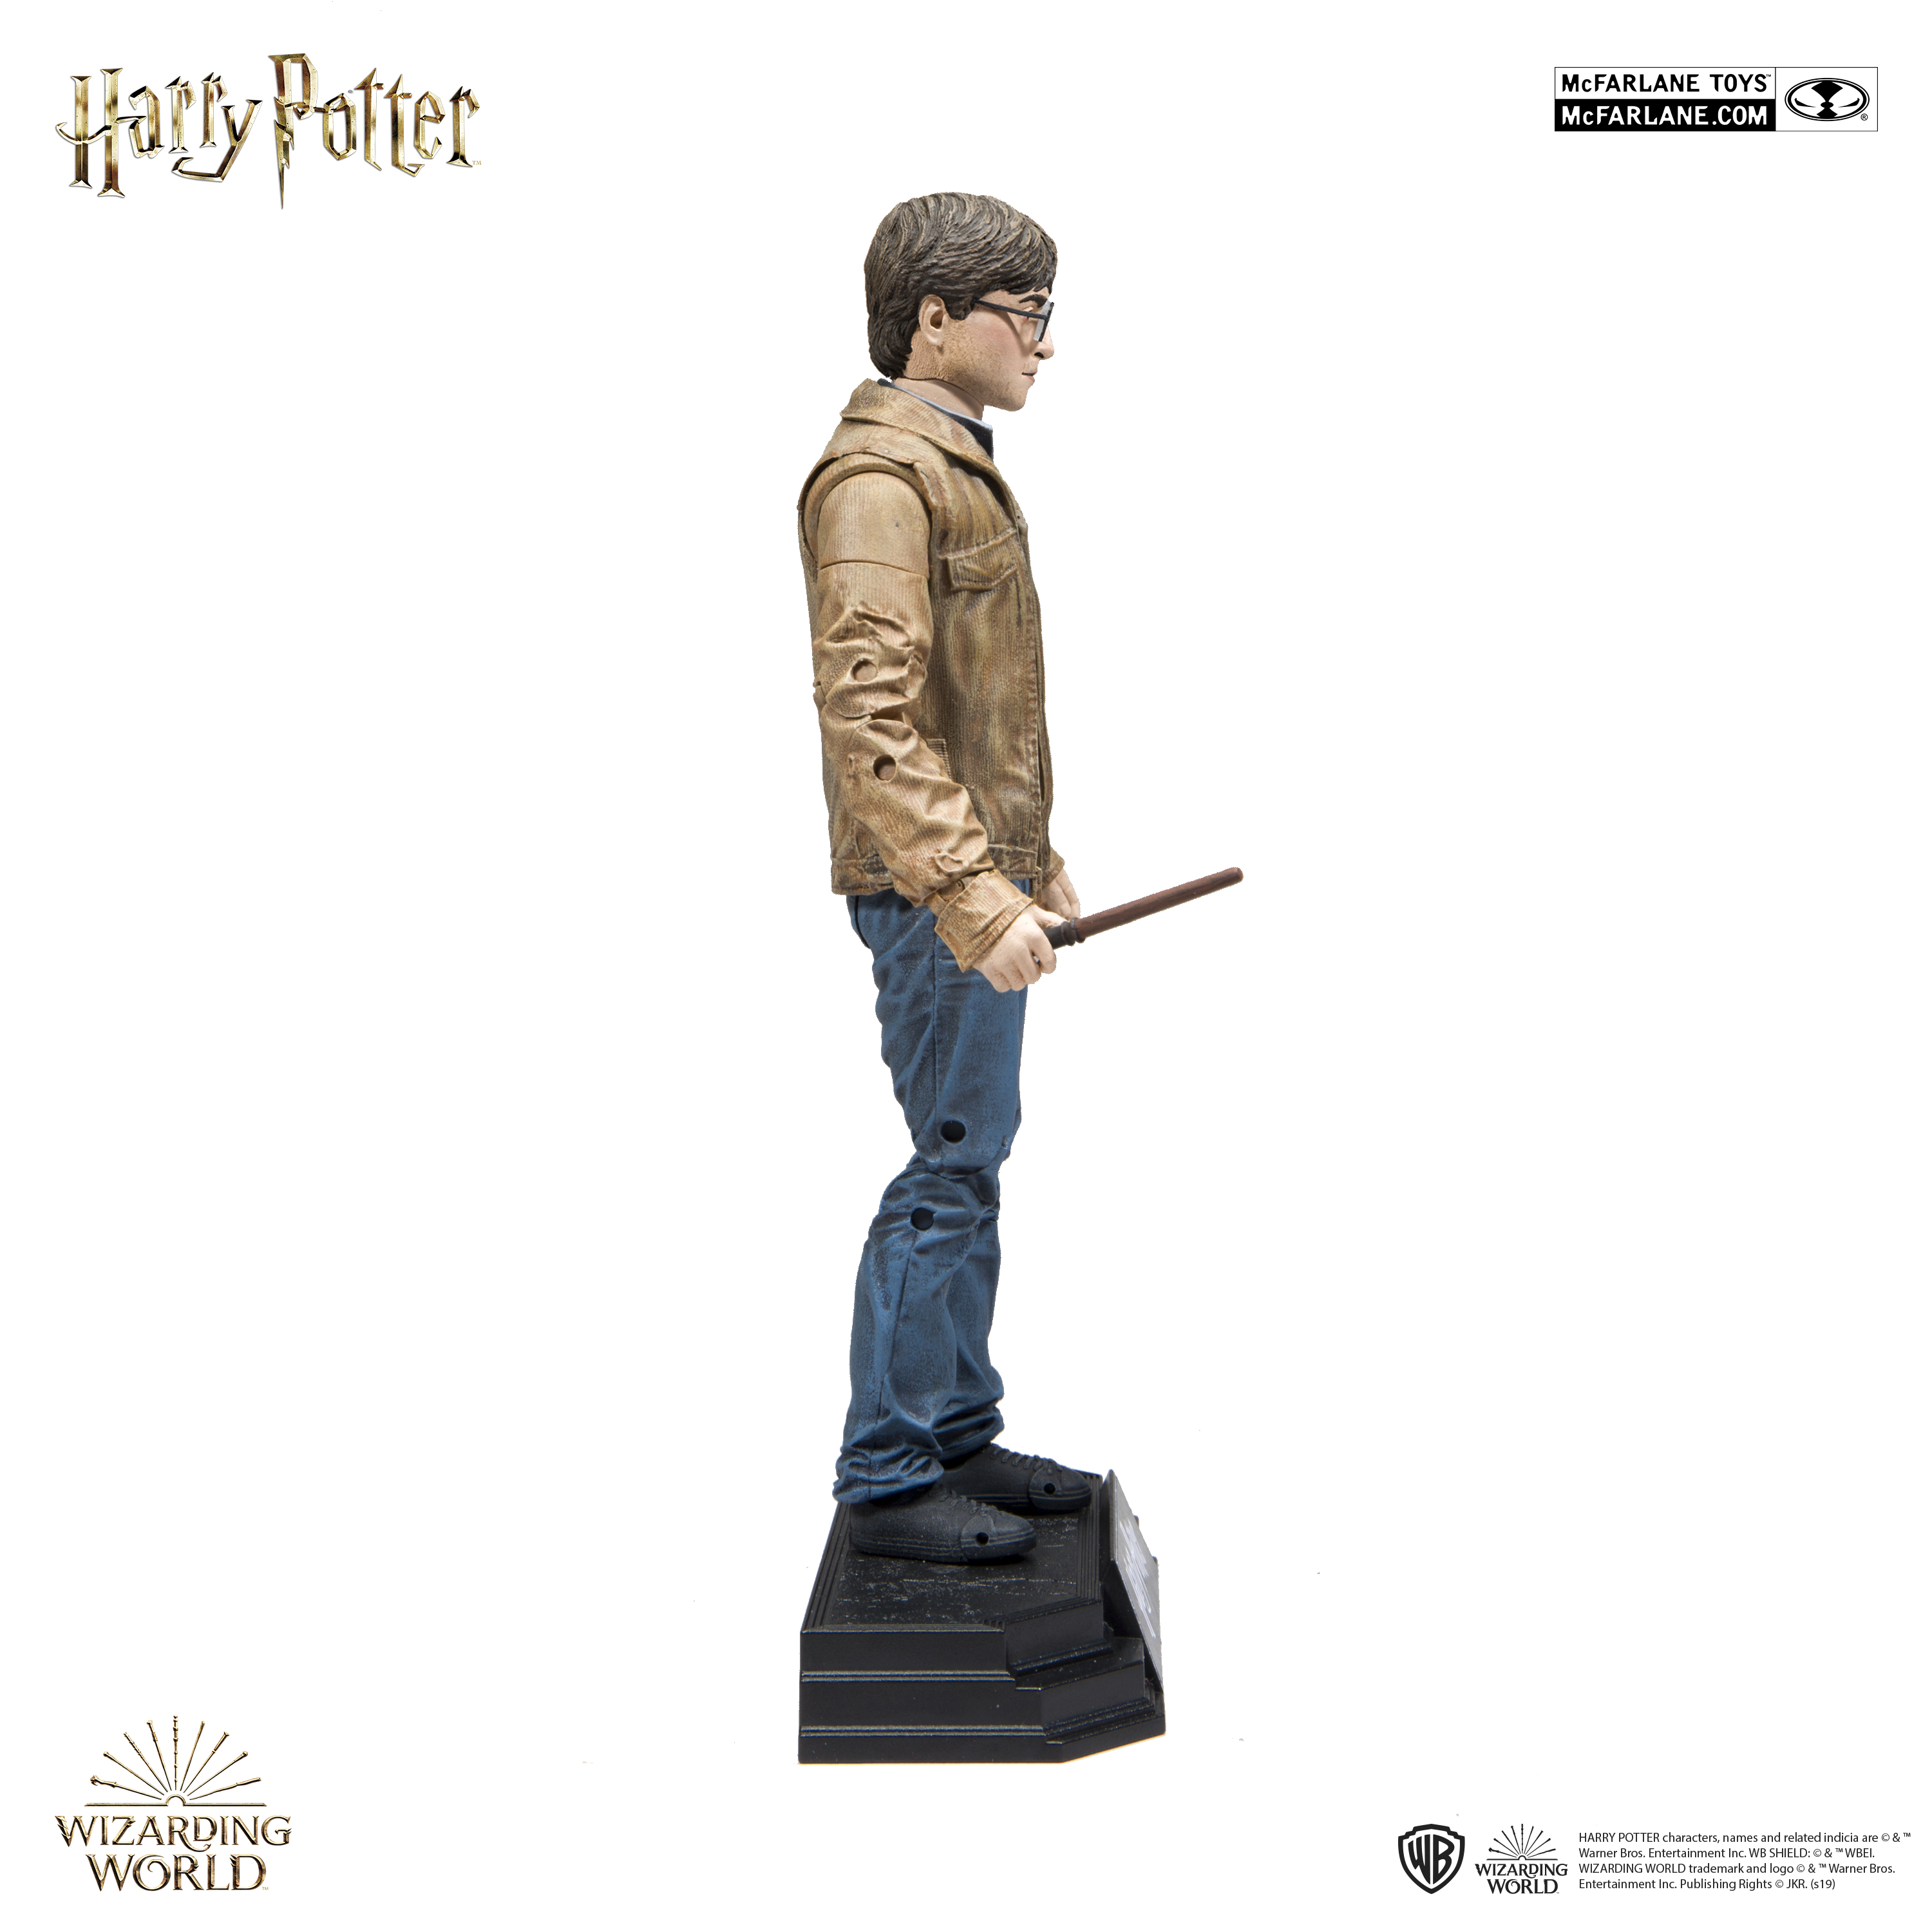 Wizarding World Harry Potter 7 Inch Action Figure Series 1 McFarlane Toys 2019 for sale online 